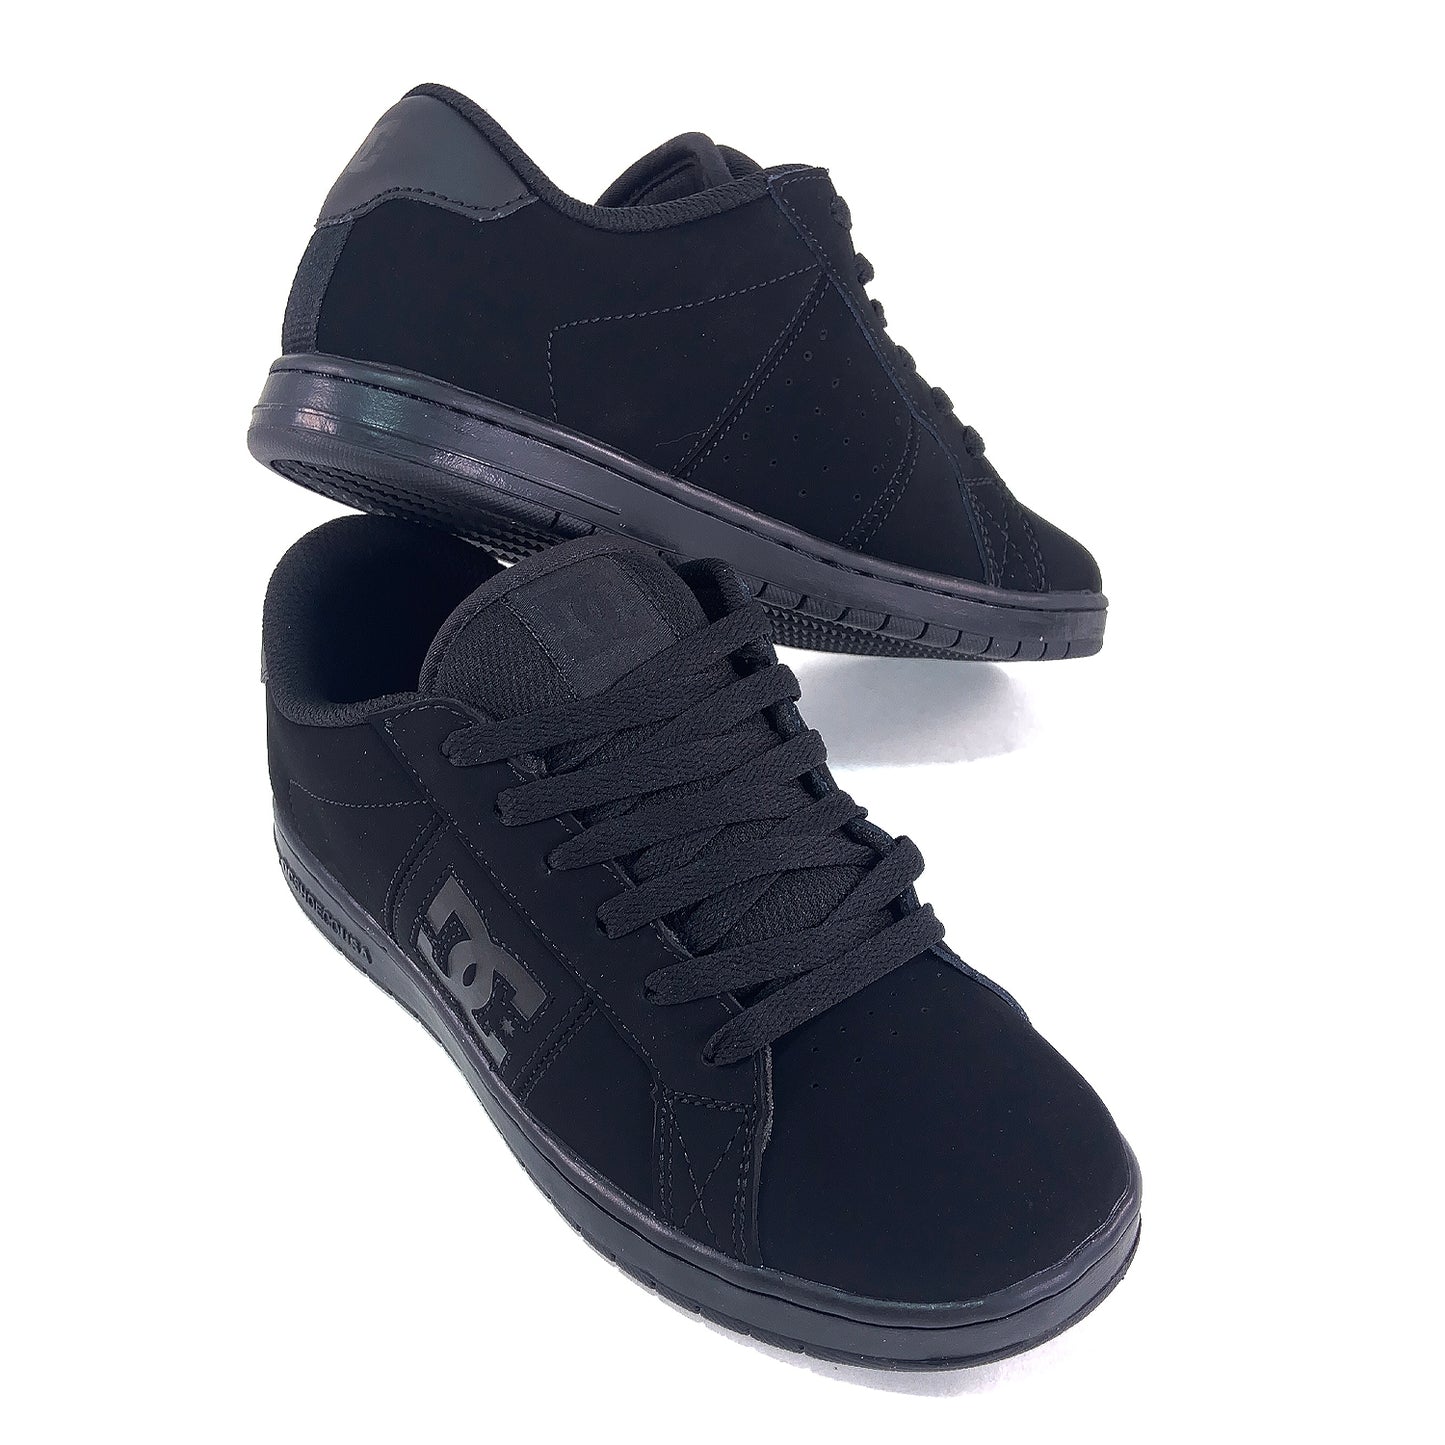 DC Striker Youth Shoes - Black - Prime Delux Store